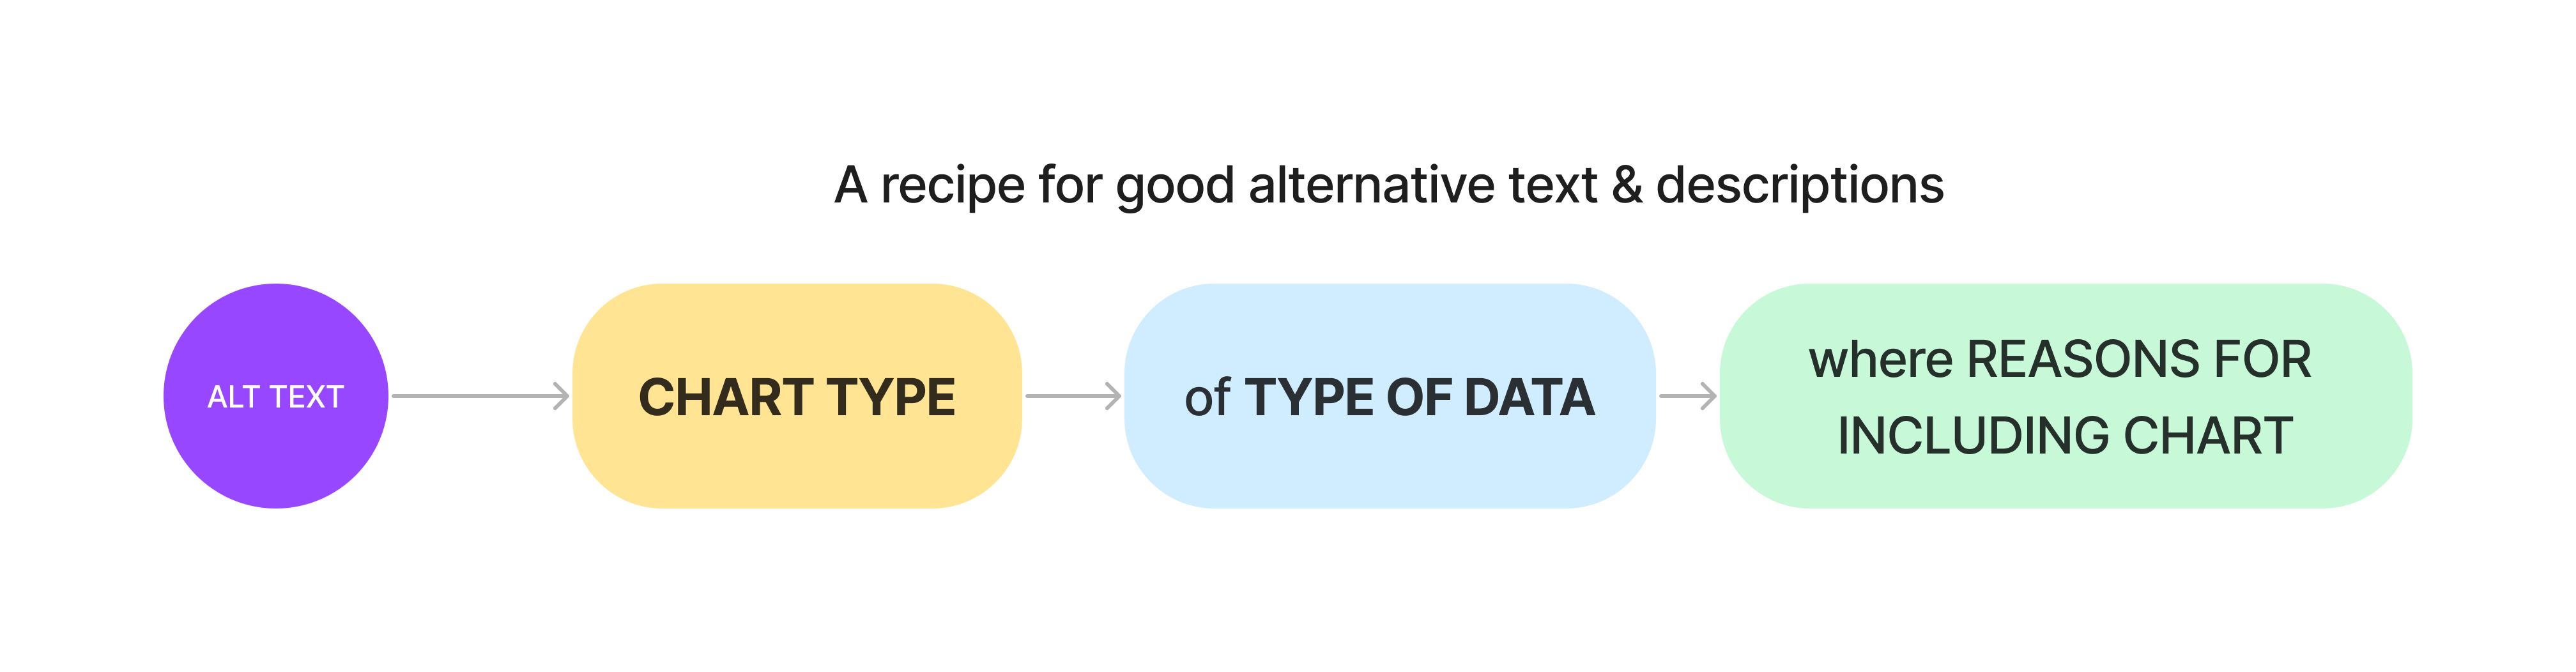 A flow chart with a recipe for good alt text, flowing from alt text to chart type to type of data, then to reasons for including chart